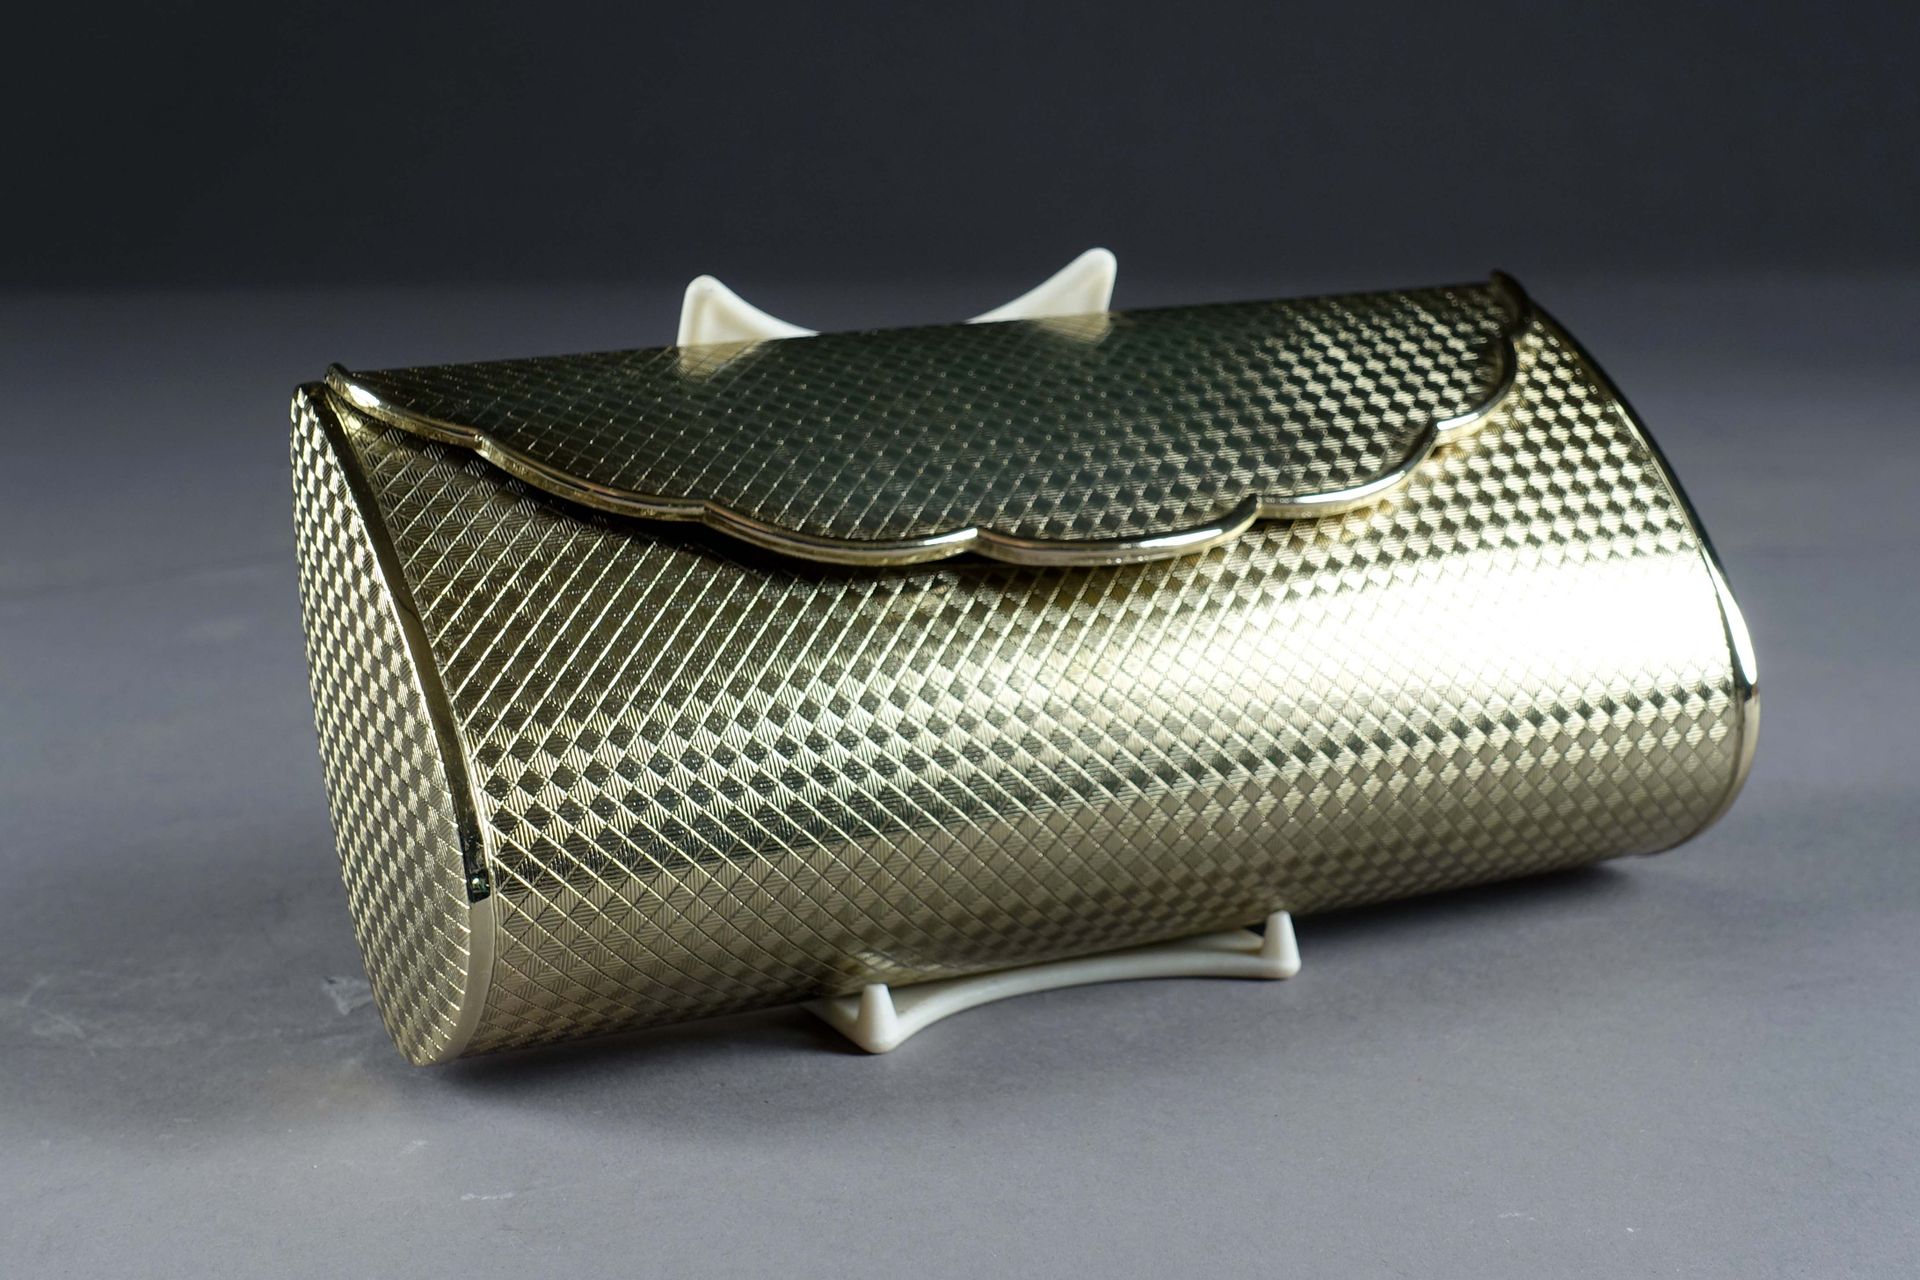 Minaudière. With a lid revealing a mirror. Metal with a checkerboard pattern, gi&hellip;